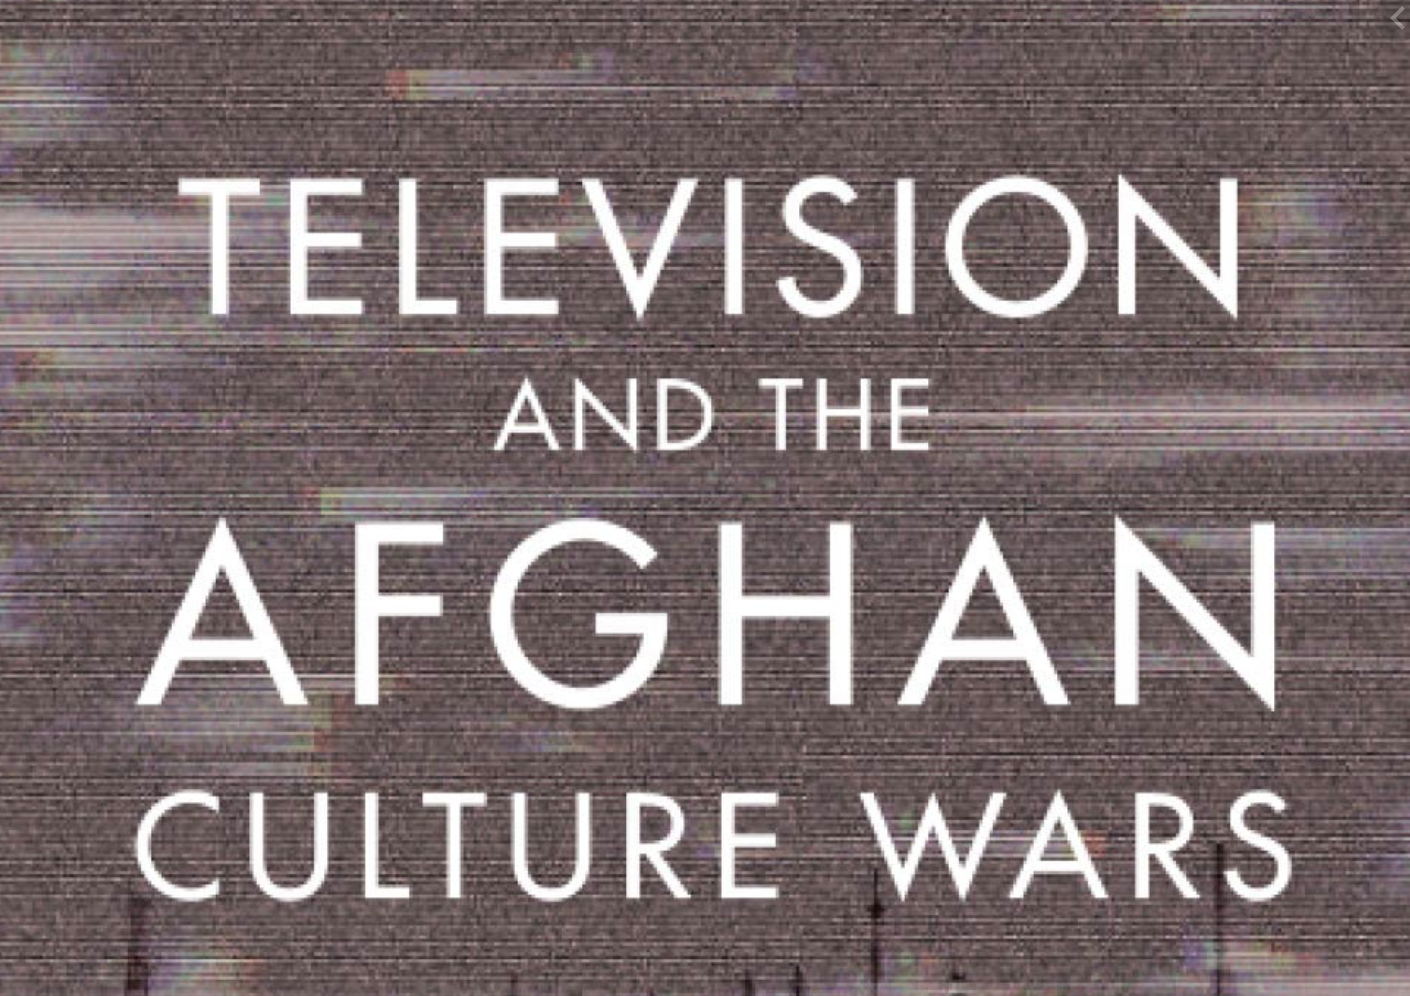 Television and the Afghan Culture Wars: Brought to You by Foreigners, Warlords, and Activists